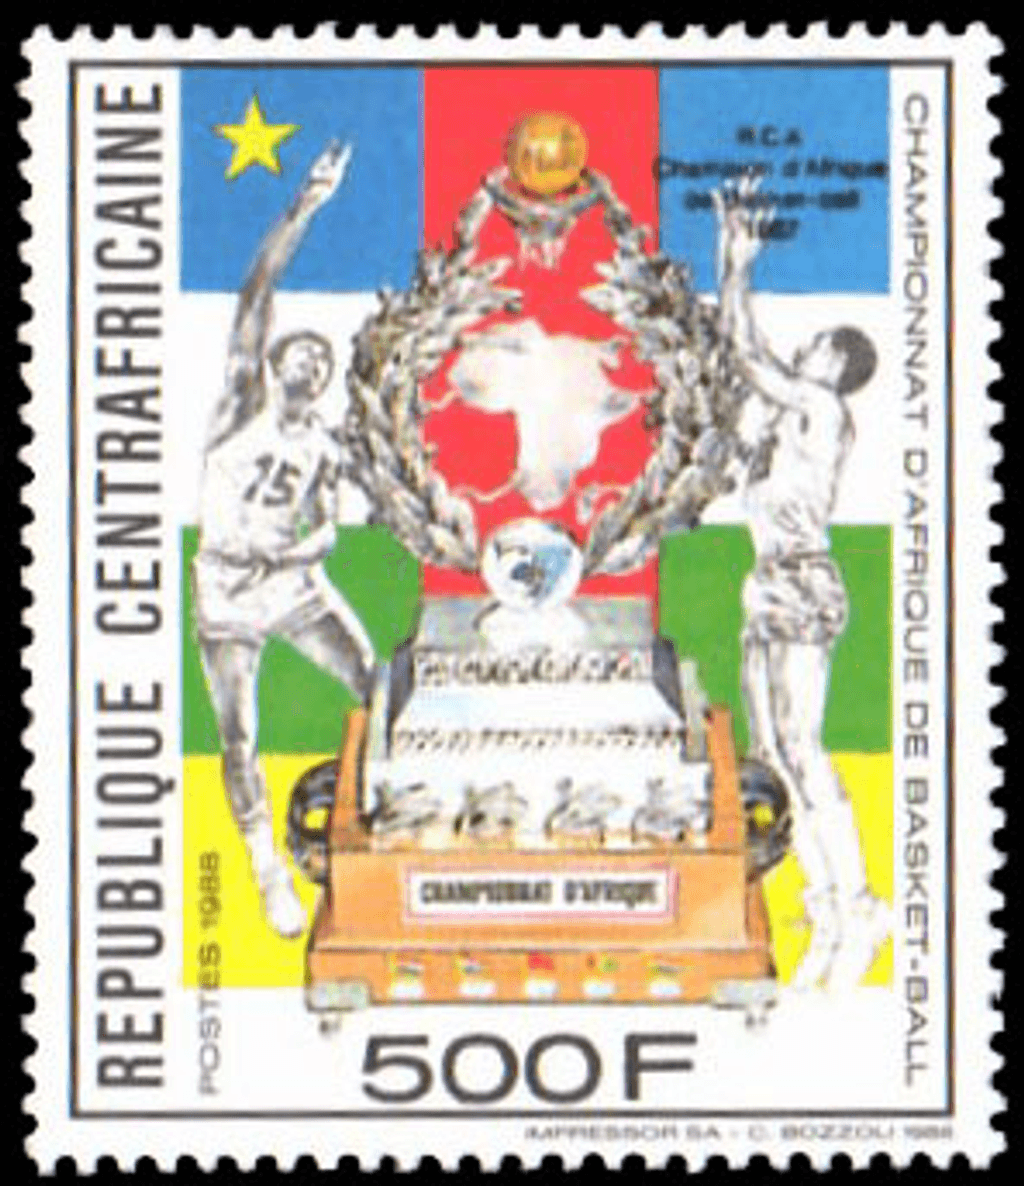 Win the basketball-african championship 1987 through the central african republic   1989